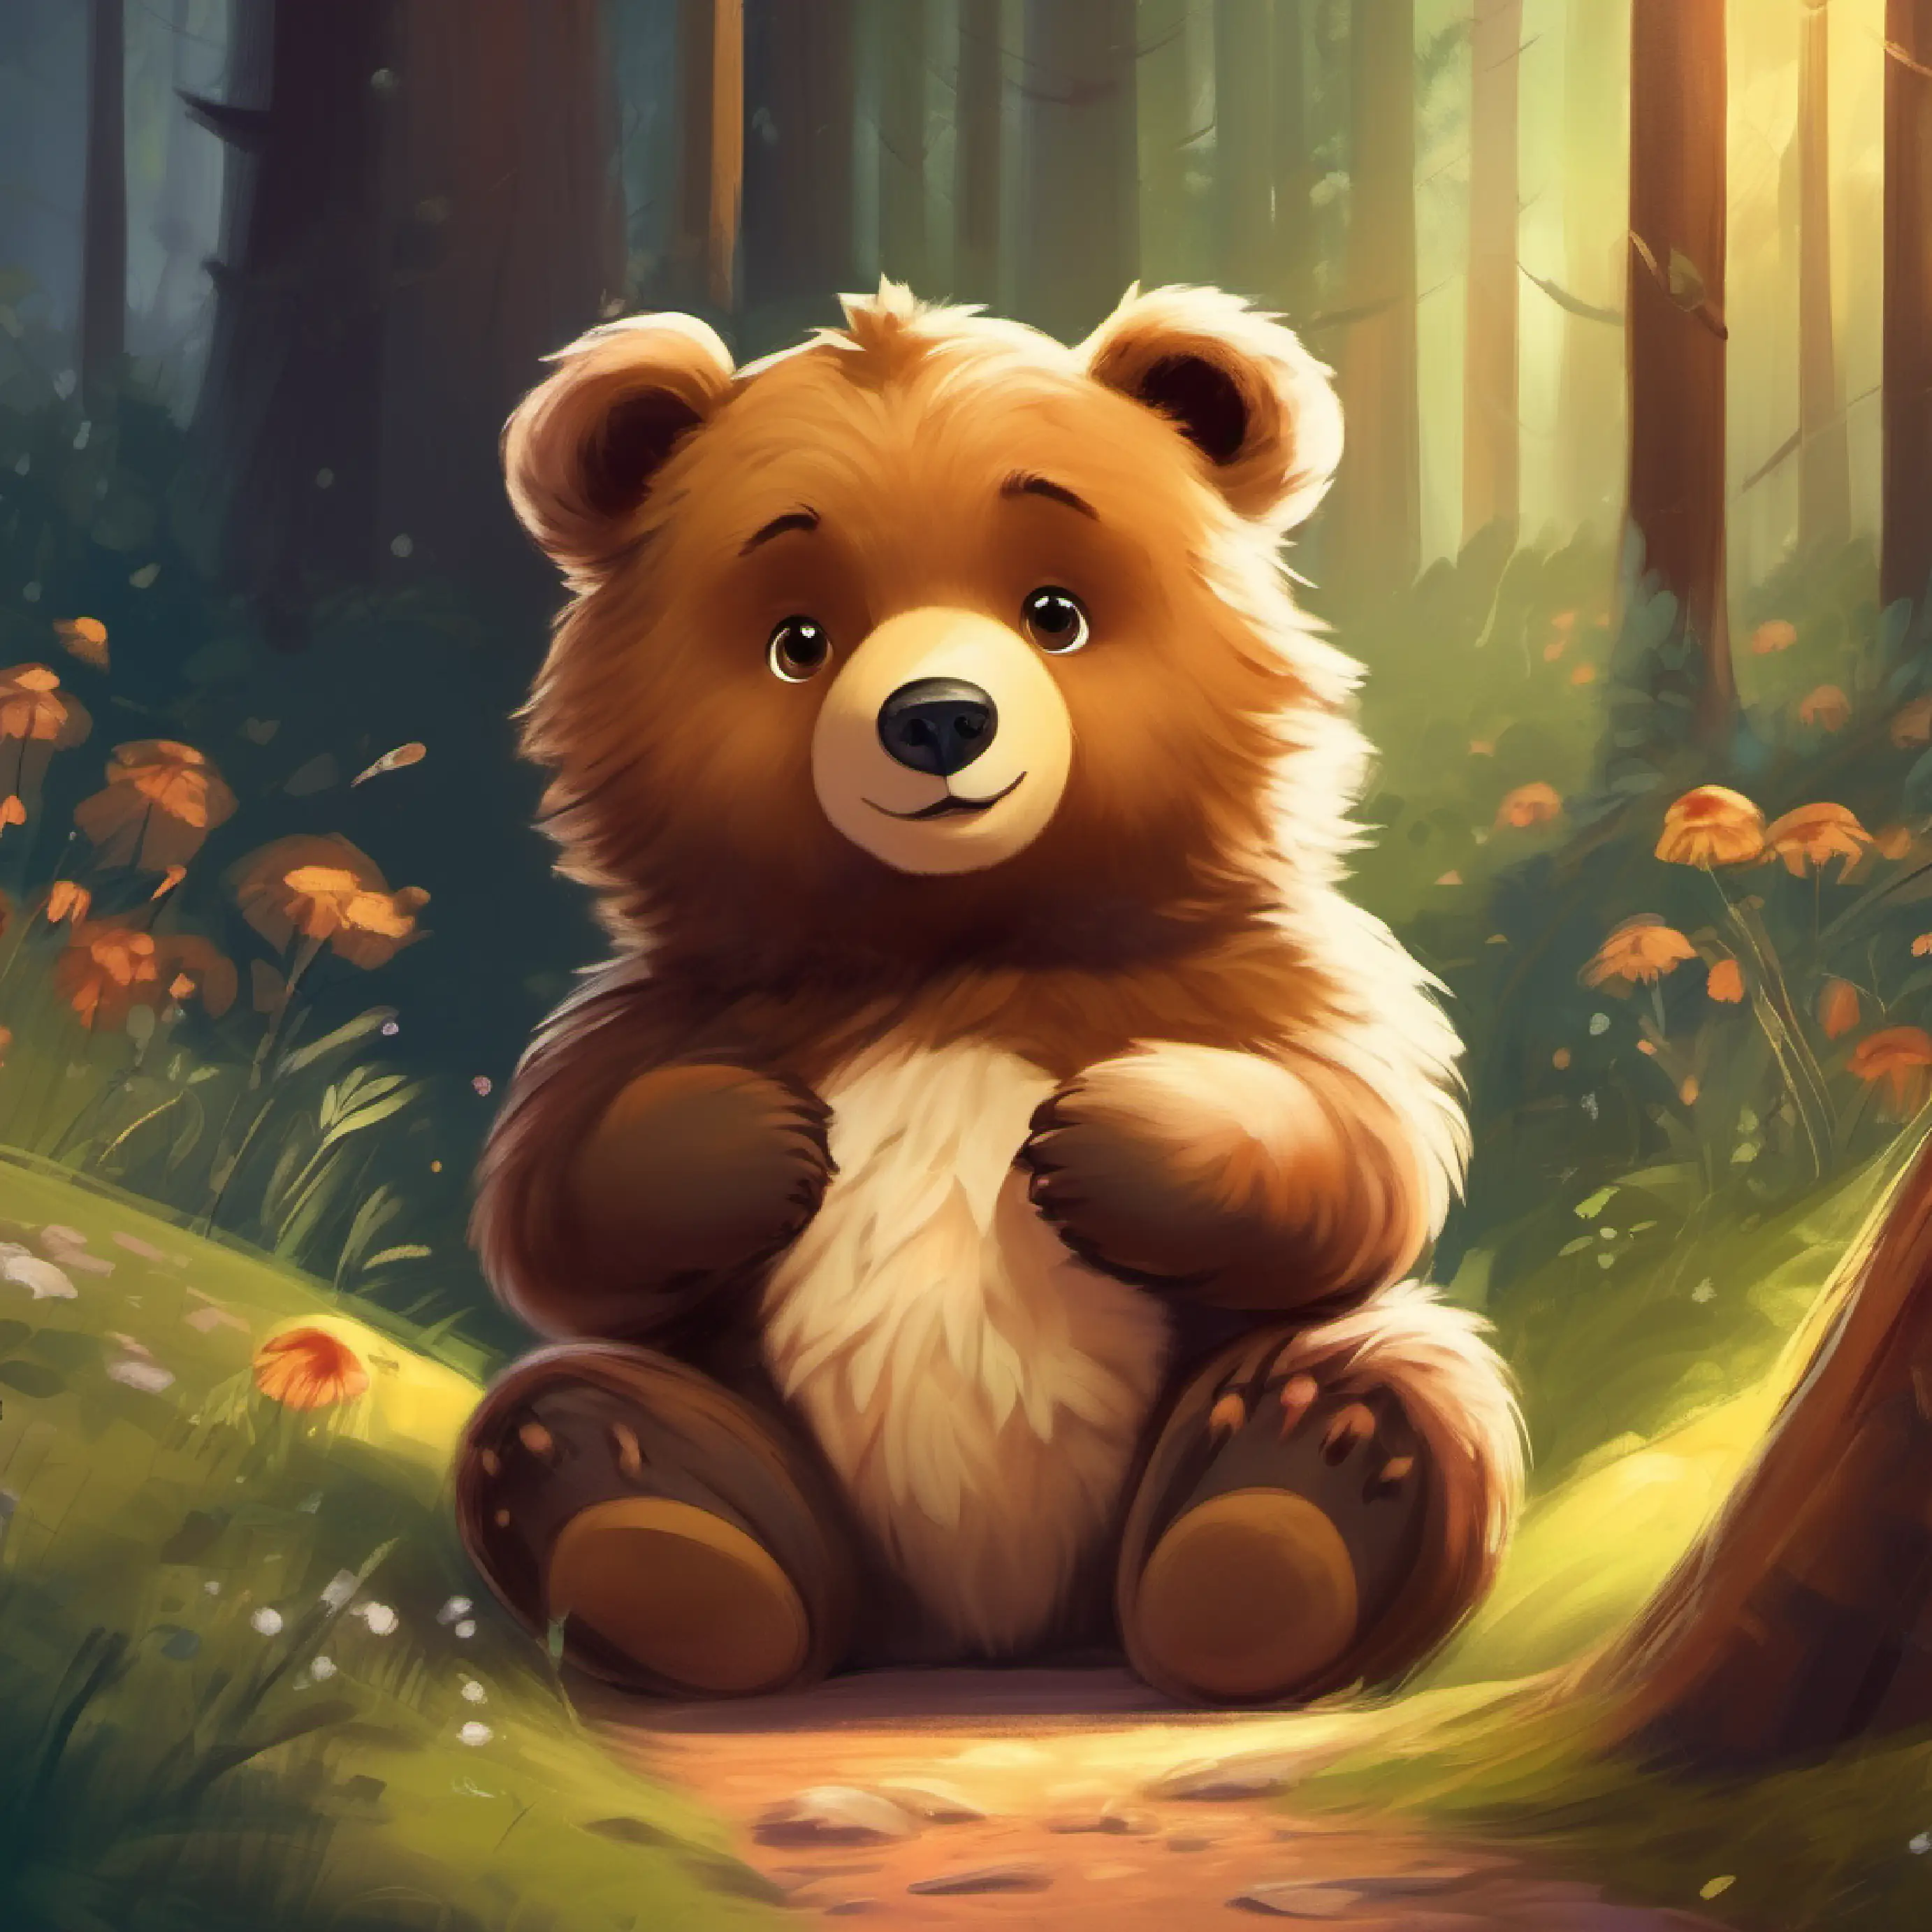 Little bear, fluffy, with curious brown eyes plays with new friends and promises to return.